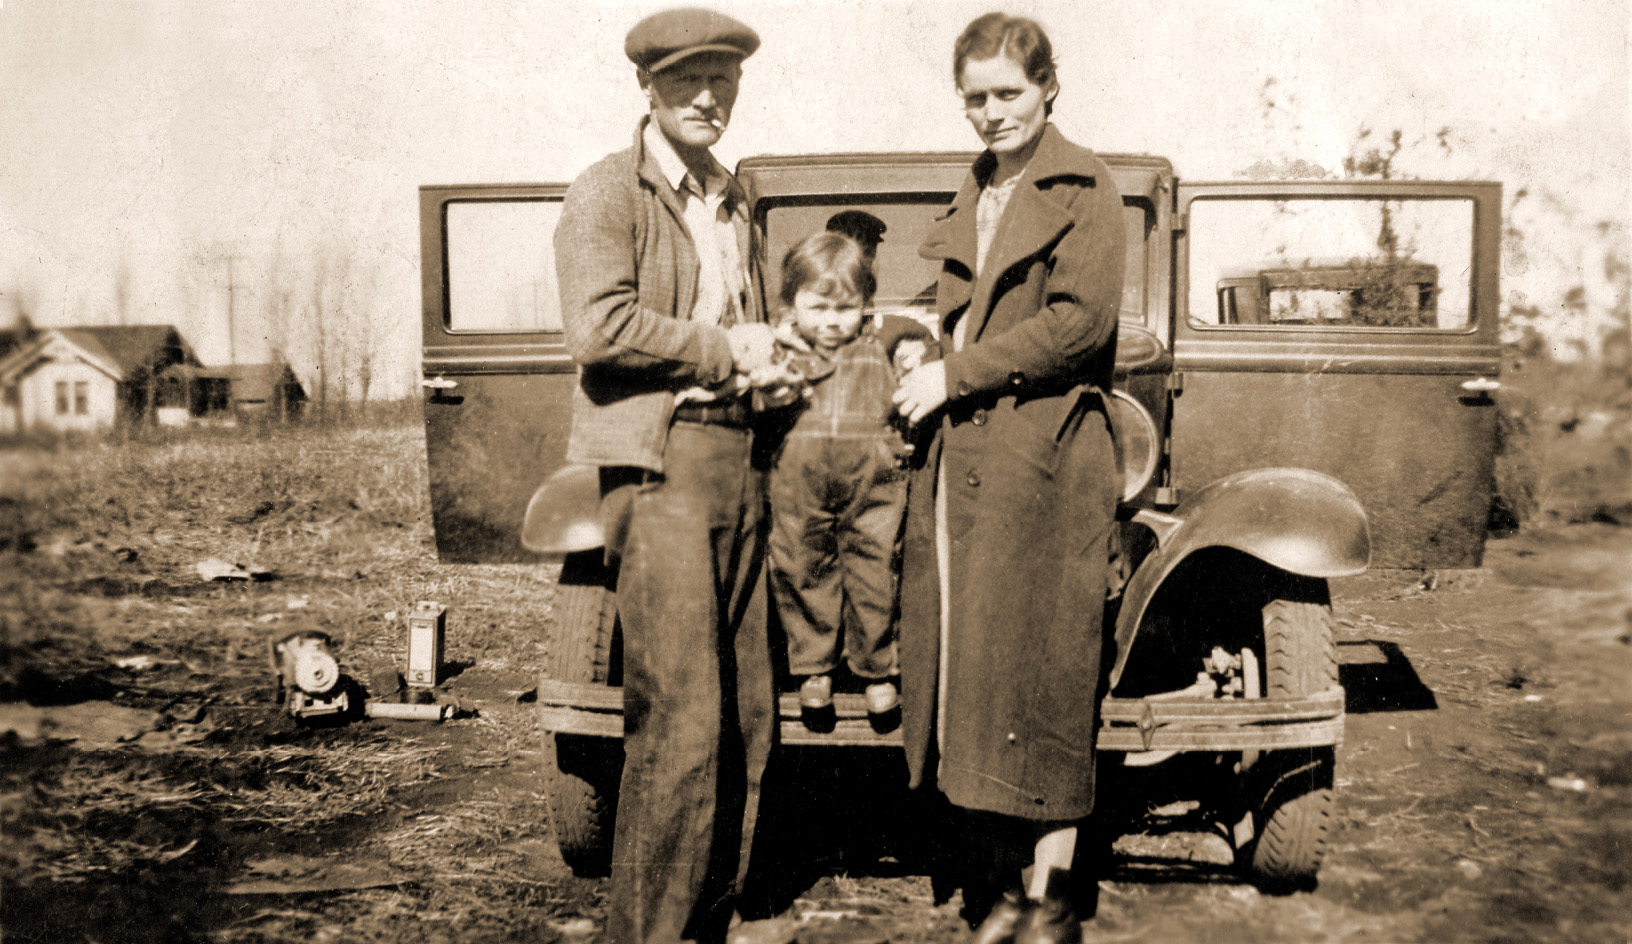 James Cecil Upton with wife Amy Eddy-Upton and baby Rosalie. Claremore, Oklahoma 1938. View full size.

[Relatives of yours? -tterrace]